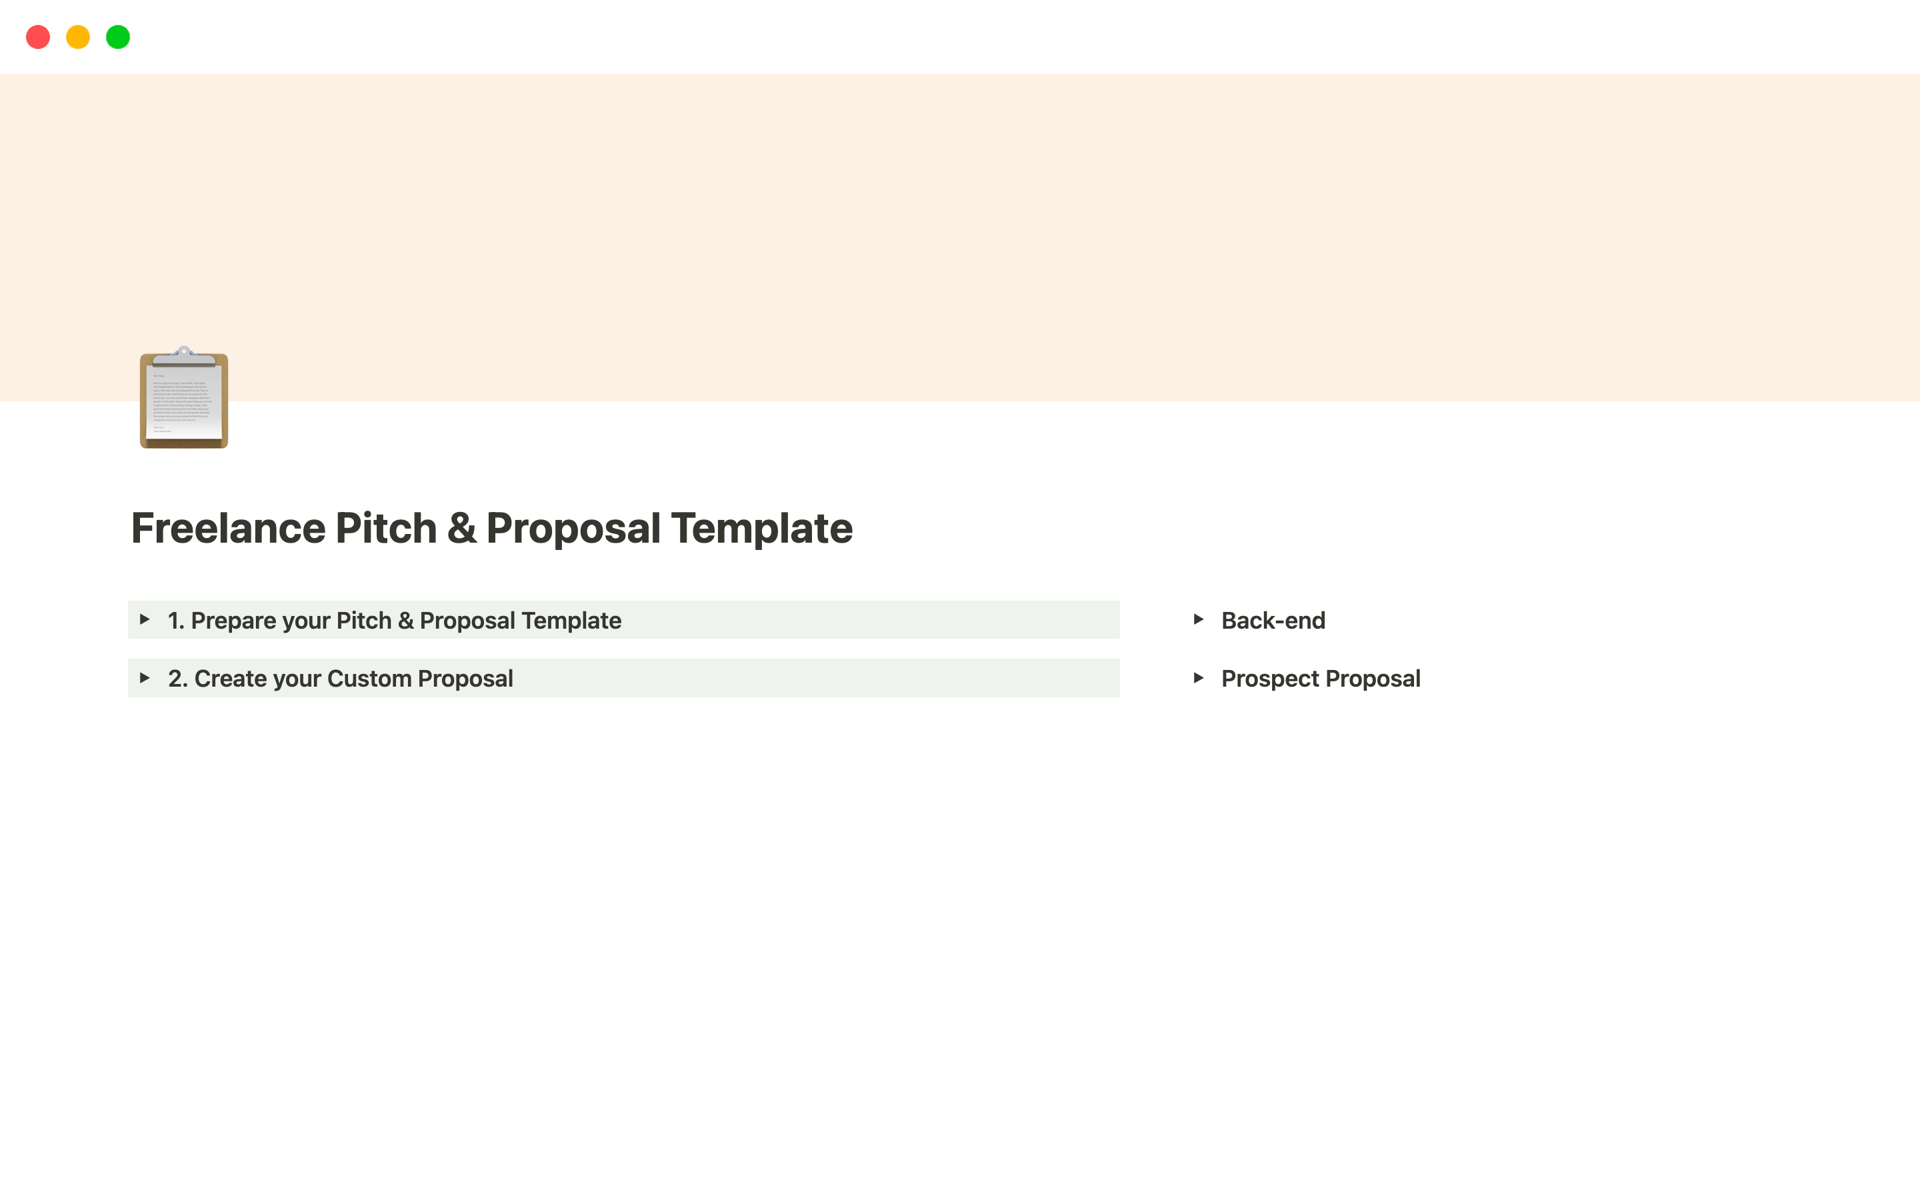 A template preview for Freelance Pitch & Proposal